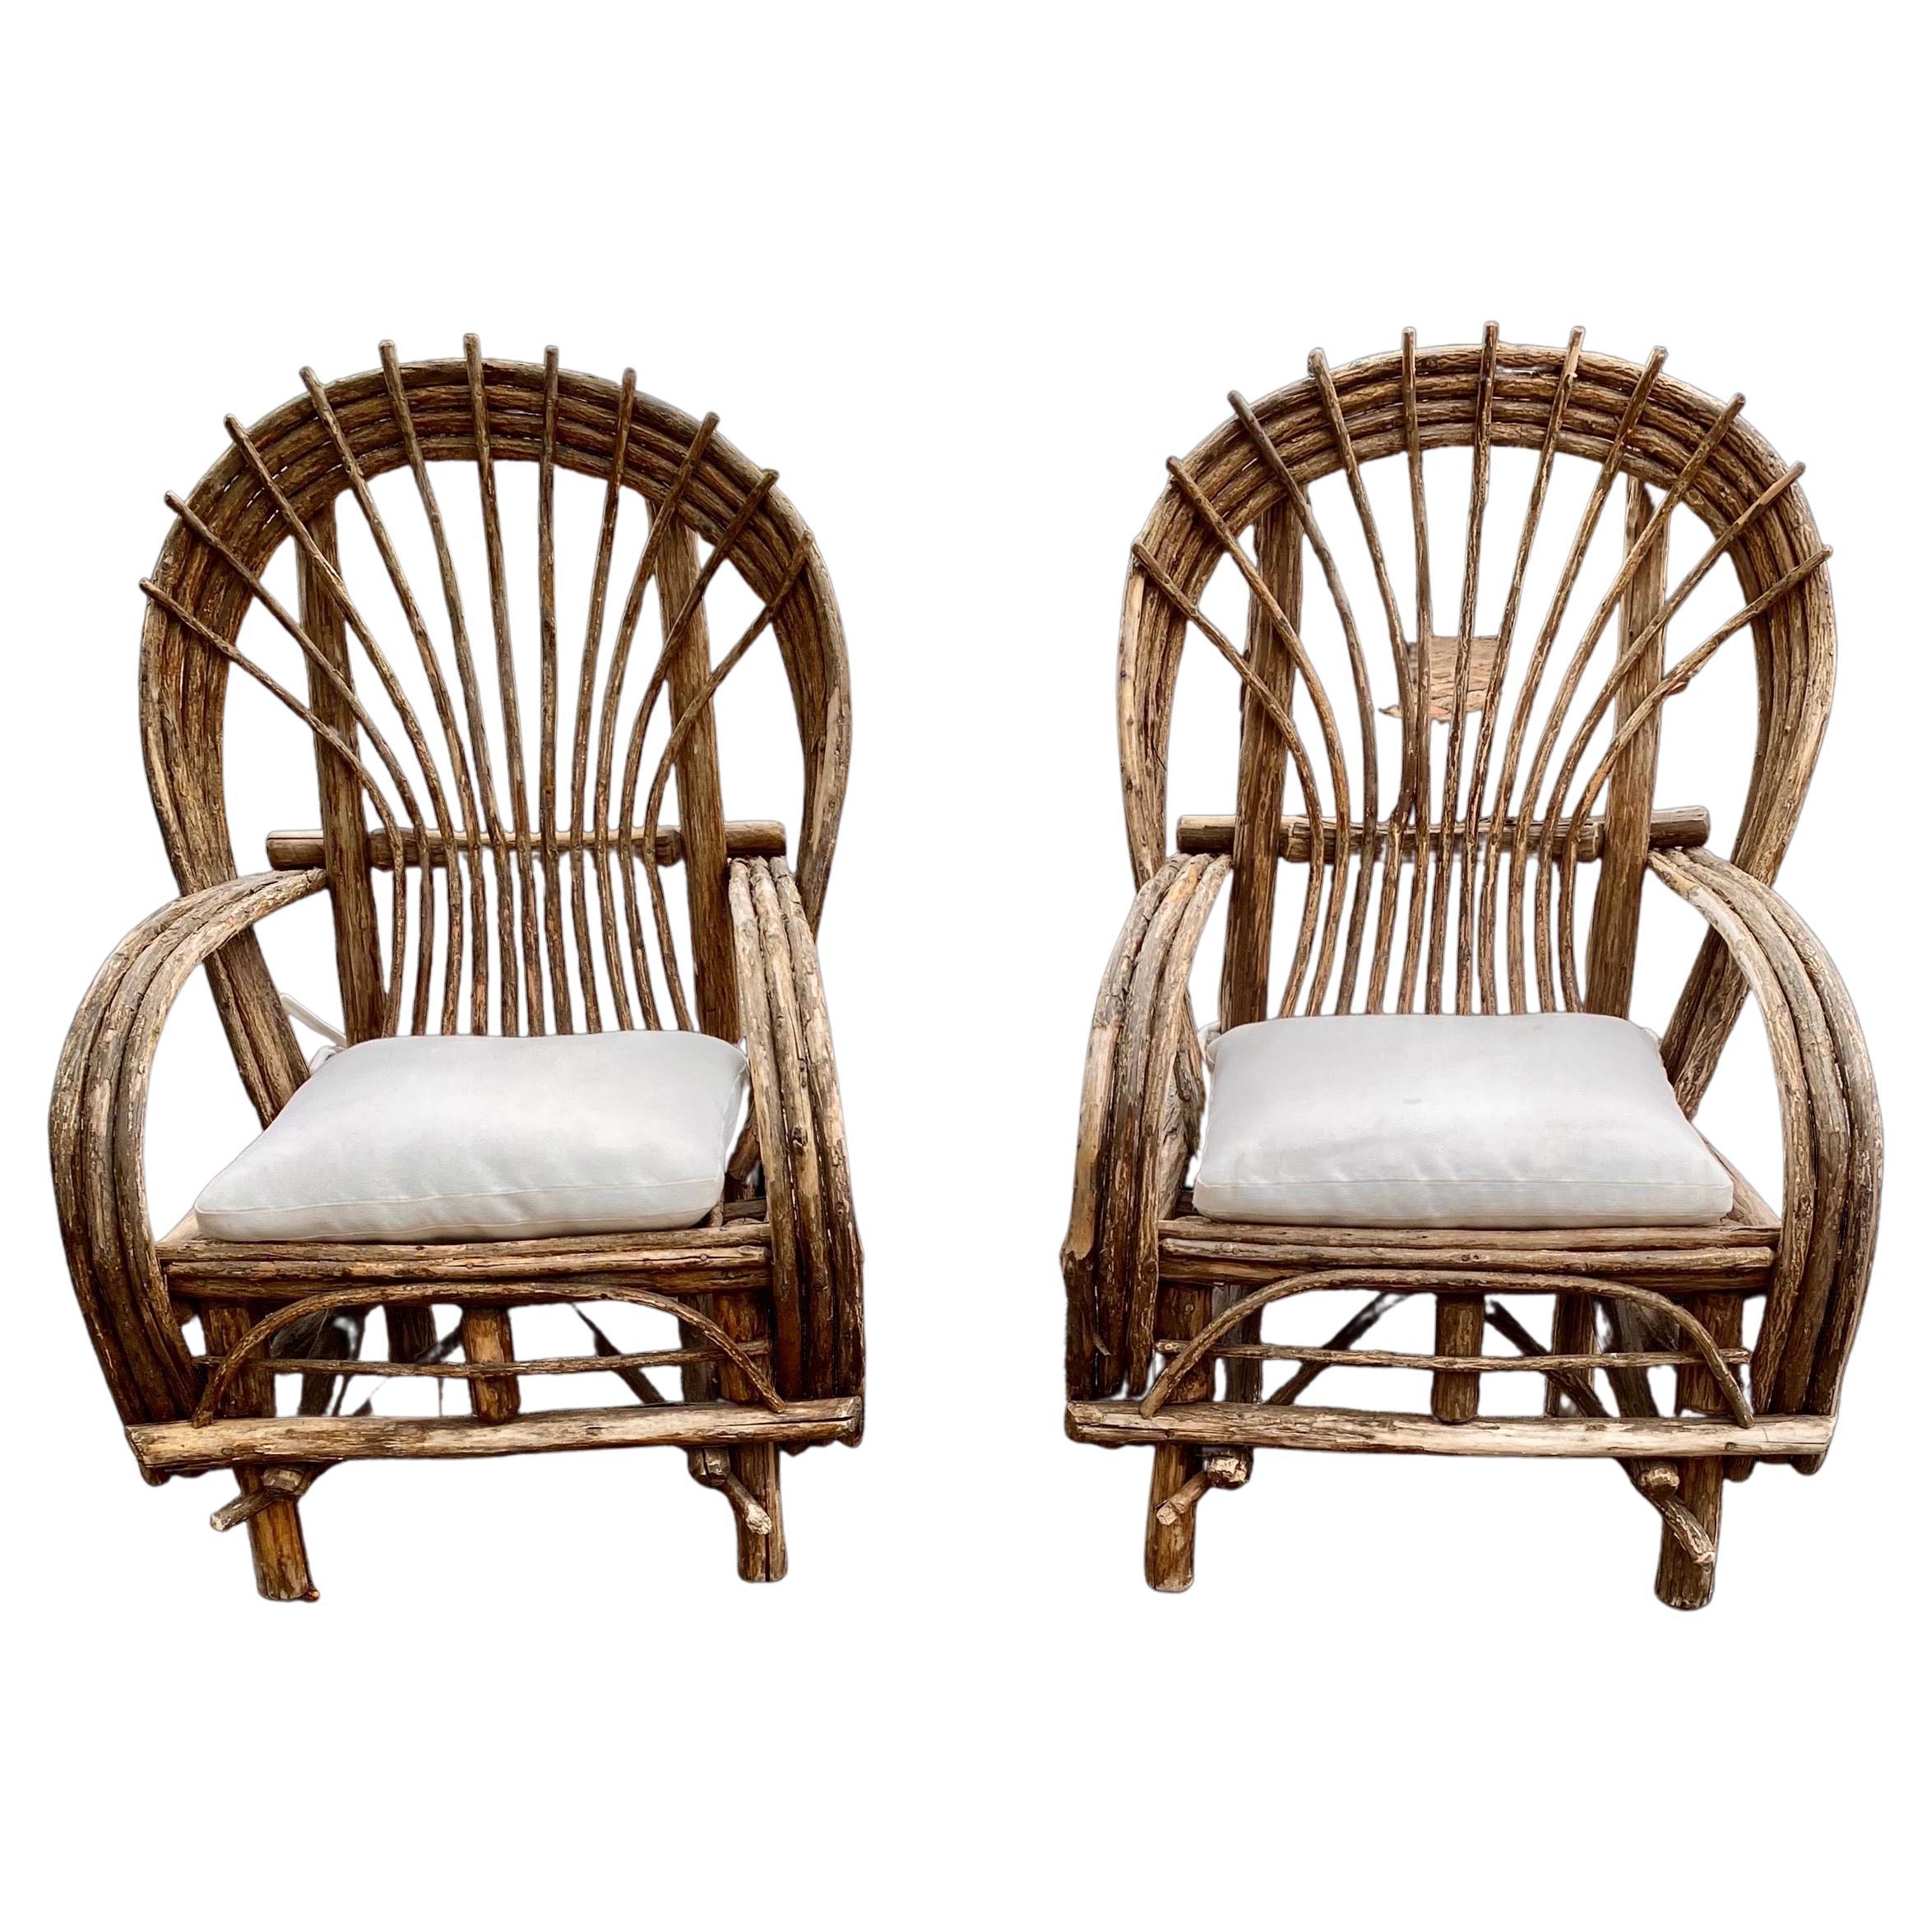 These fine old chairs made to grace an Adirondack lodge's deep porch or lawn were made in the 1920's. Made most likely on site at a lodge and found in Upstate New York they are constructed of willow limbs & twigs bent freehand, cut and screwed